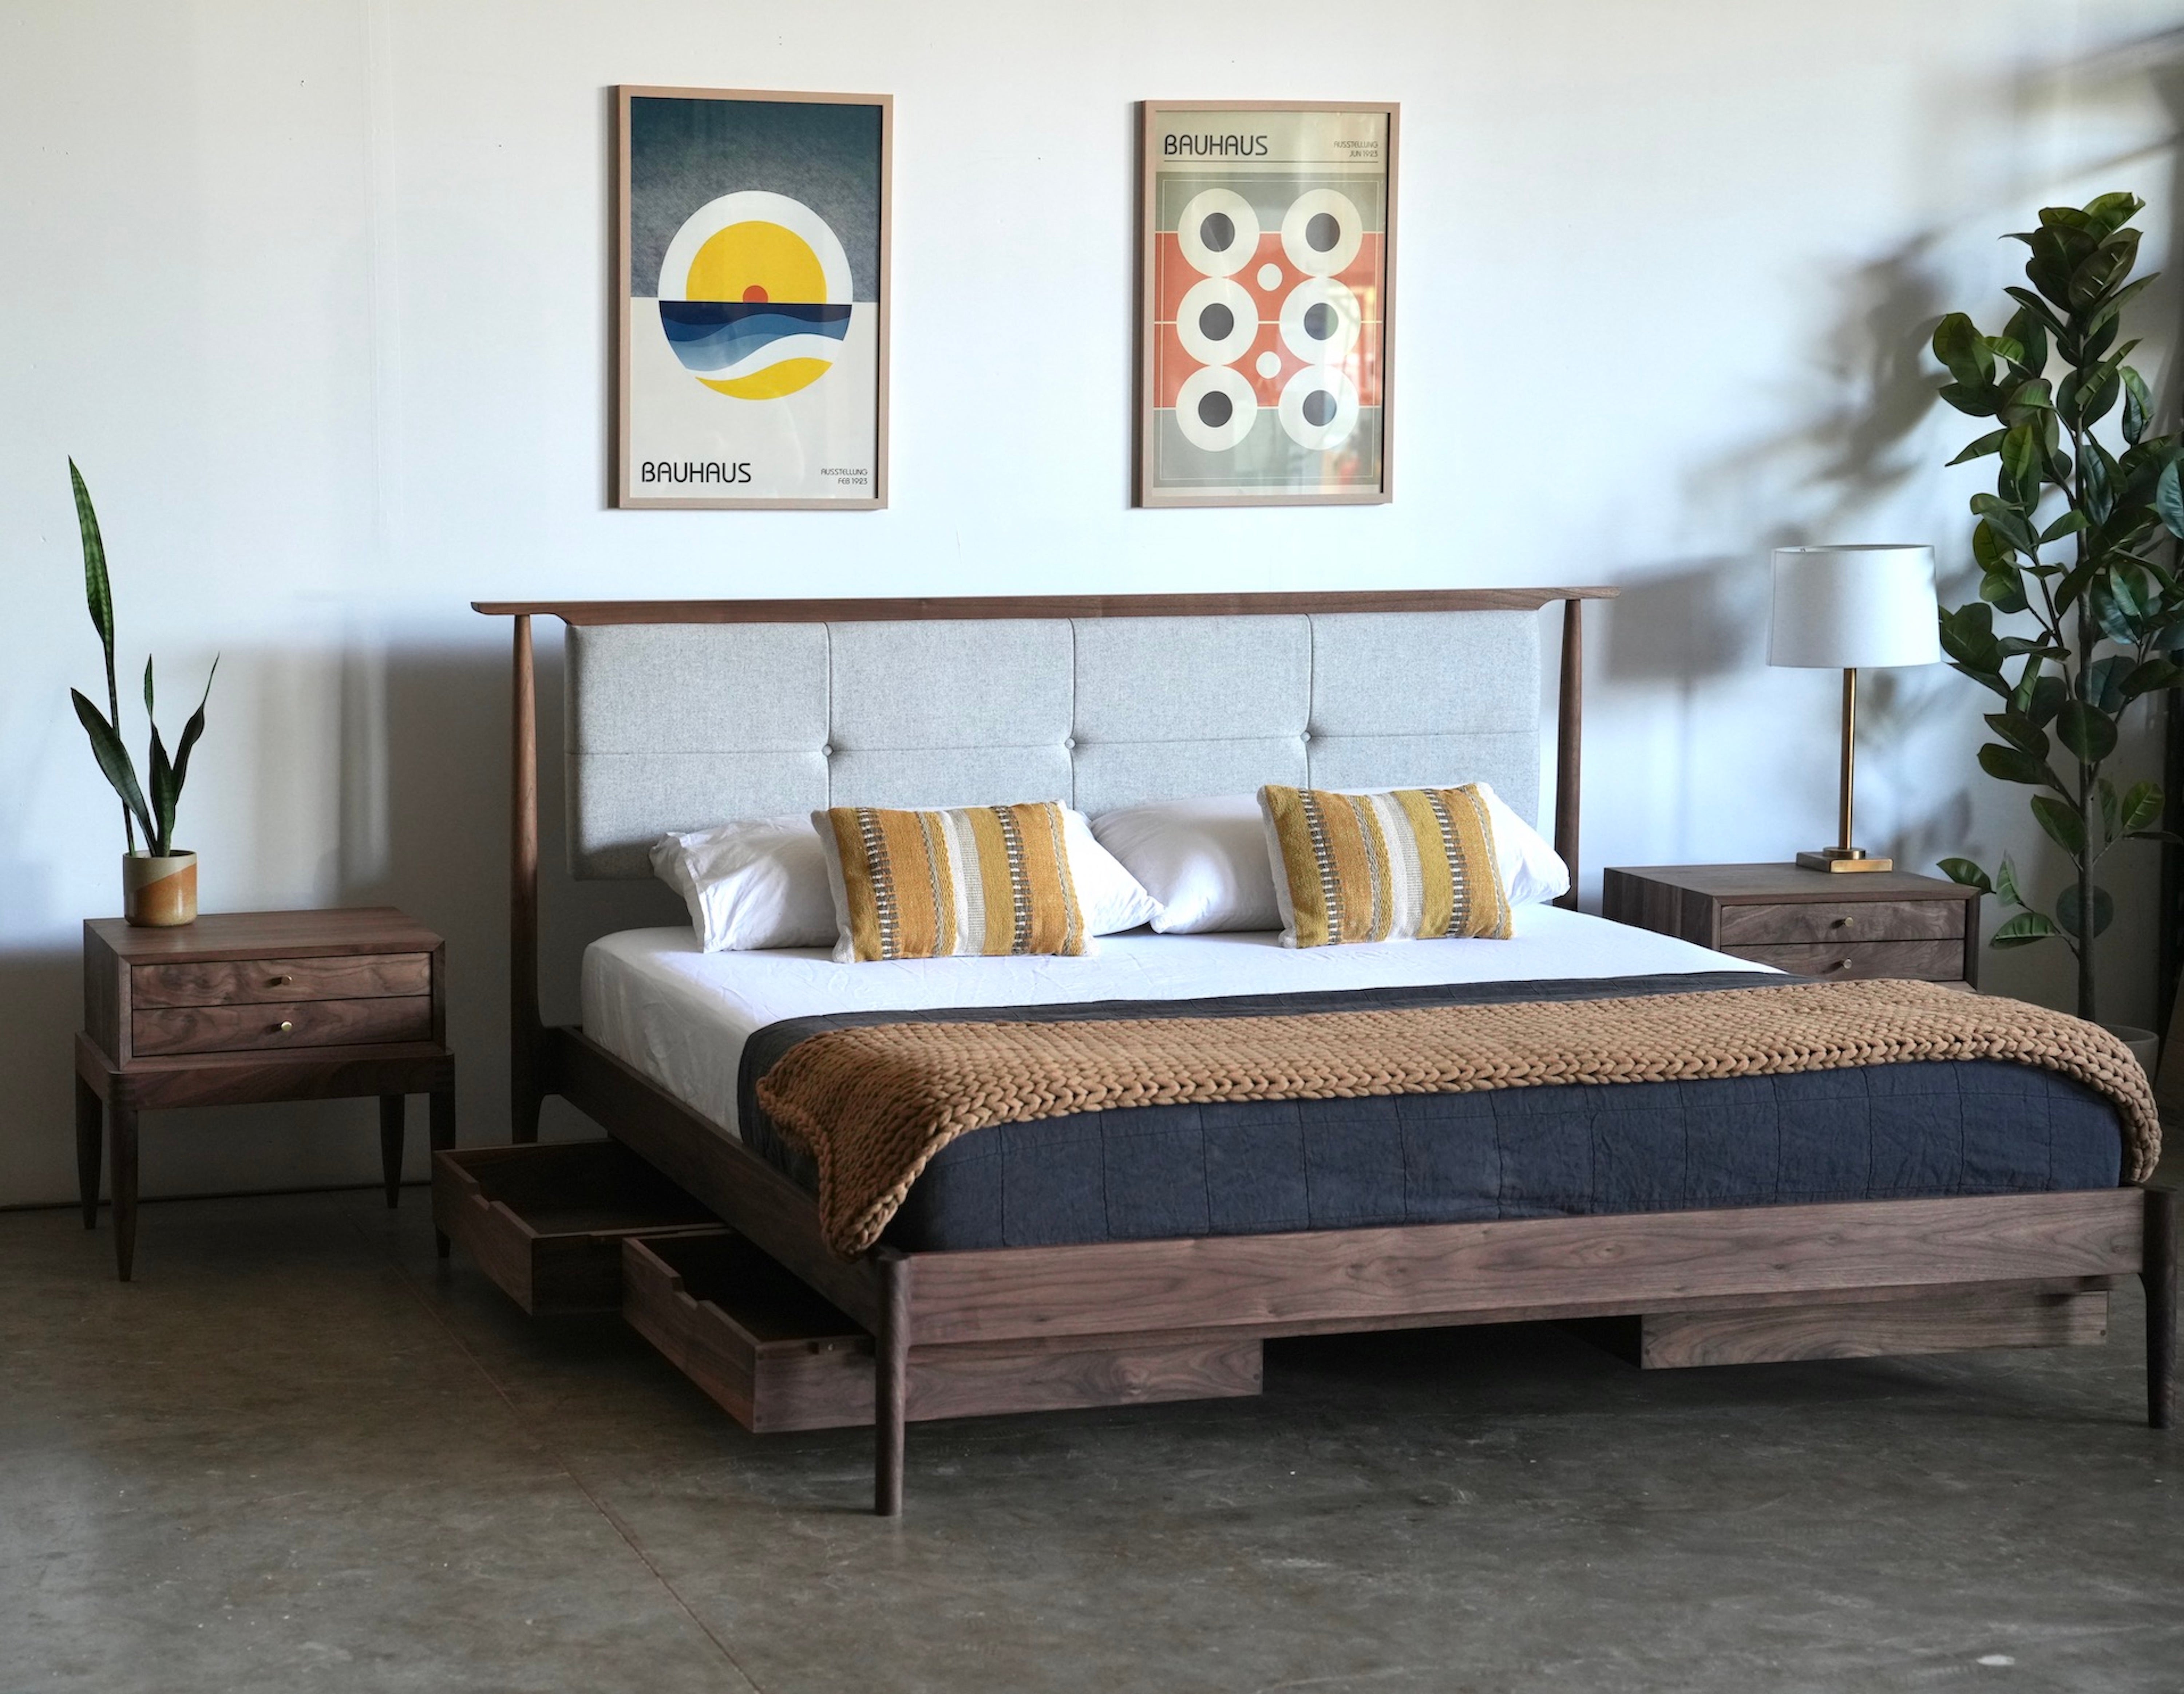 Though delicate in design, this bed is remarkably sturdy and stout. The design goal was to have a bed that is both simple in appearance and that gives a strong presence. To have the headboard extend 6